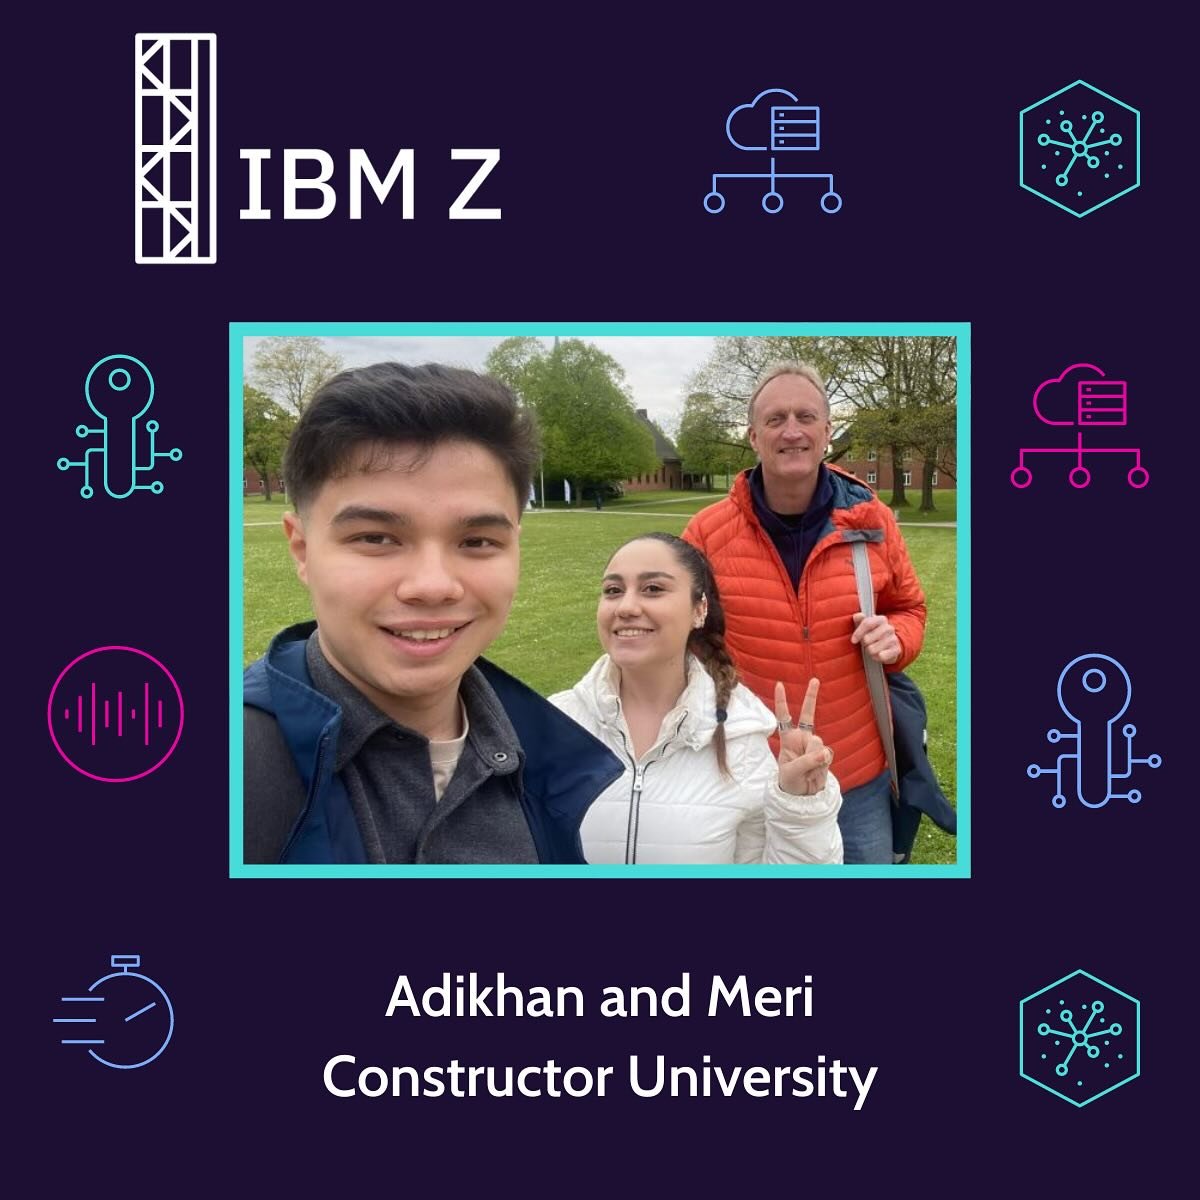 Shoutout to Adikhan and Meri at Constructor University in Bremen, Germany who hosted Redelf Jan&szlig;en and zSystems Brand Technical Specialist at IBM Germany this week! 🇩🇪 

Check out this post which includes a sneak peak on engaging students nex